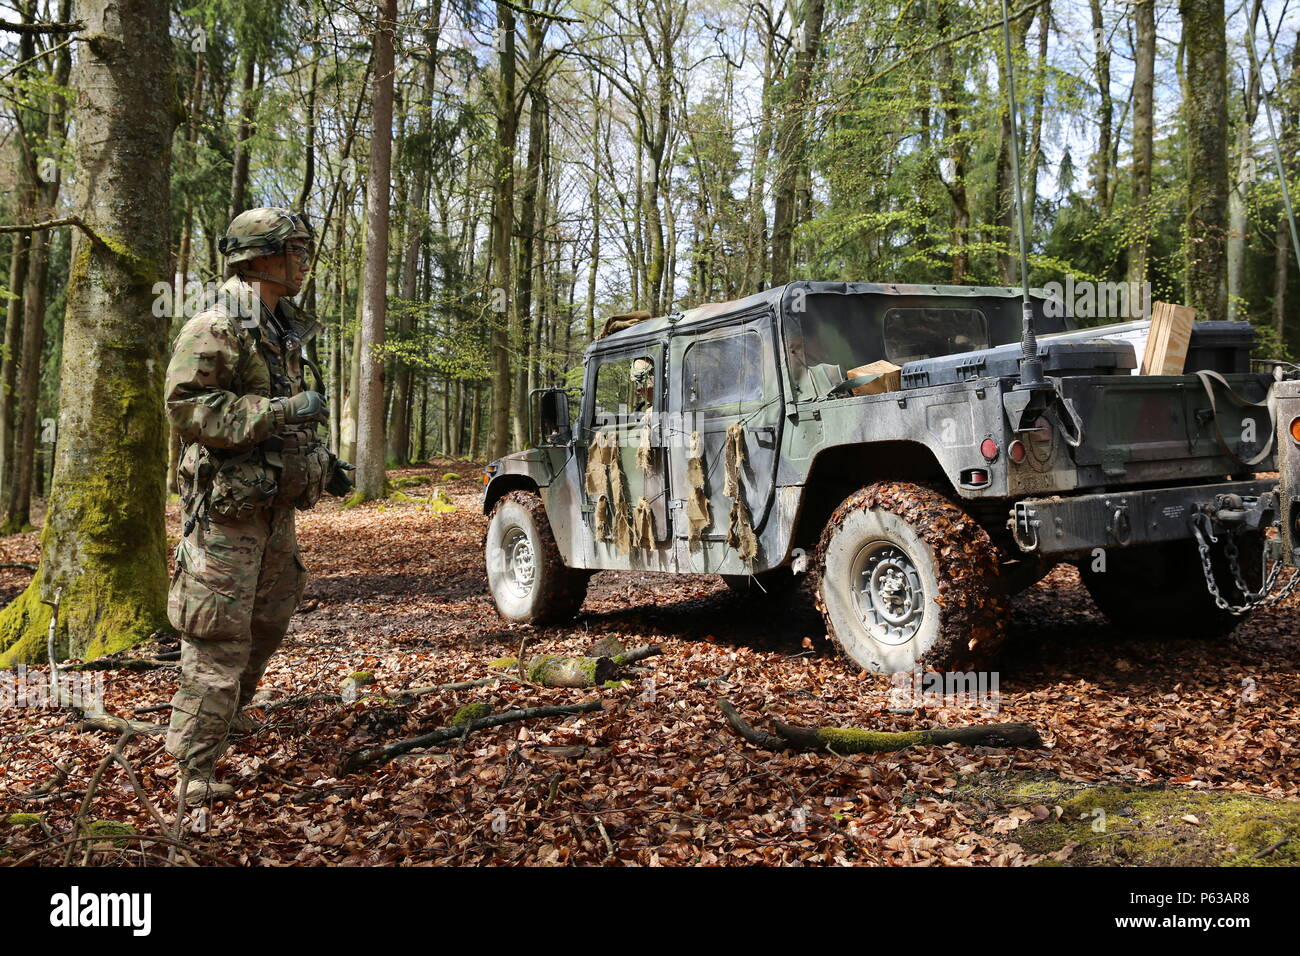 U.S. Soldier, left, of 1st Squadron, 91st Cavalry Regiment, 173rd Airborne Brigade ground guides a Humvee while conducting tactical operations during exercise Saber Junction 16 at the U.S. Army’s Joint Multinational Readiness Center (JMRC) in Hohenfels, Germany, April 16, 2016. Saber Junction 16 is the U.S. Army Europe’s 173rd Airborne Brigade’s combat training center certification exercise, taking place at the JMRC in Hohenfels, Germany, Mar. 31-Apr. 24, 2016.  The exercise is designed to evaluate the readiness of the Army’s Europe-based combat brigades to conduct unified land operations and  Stock Photo